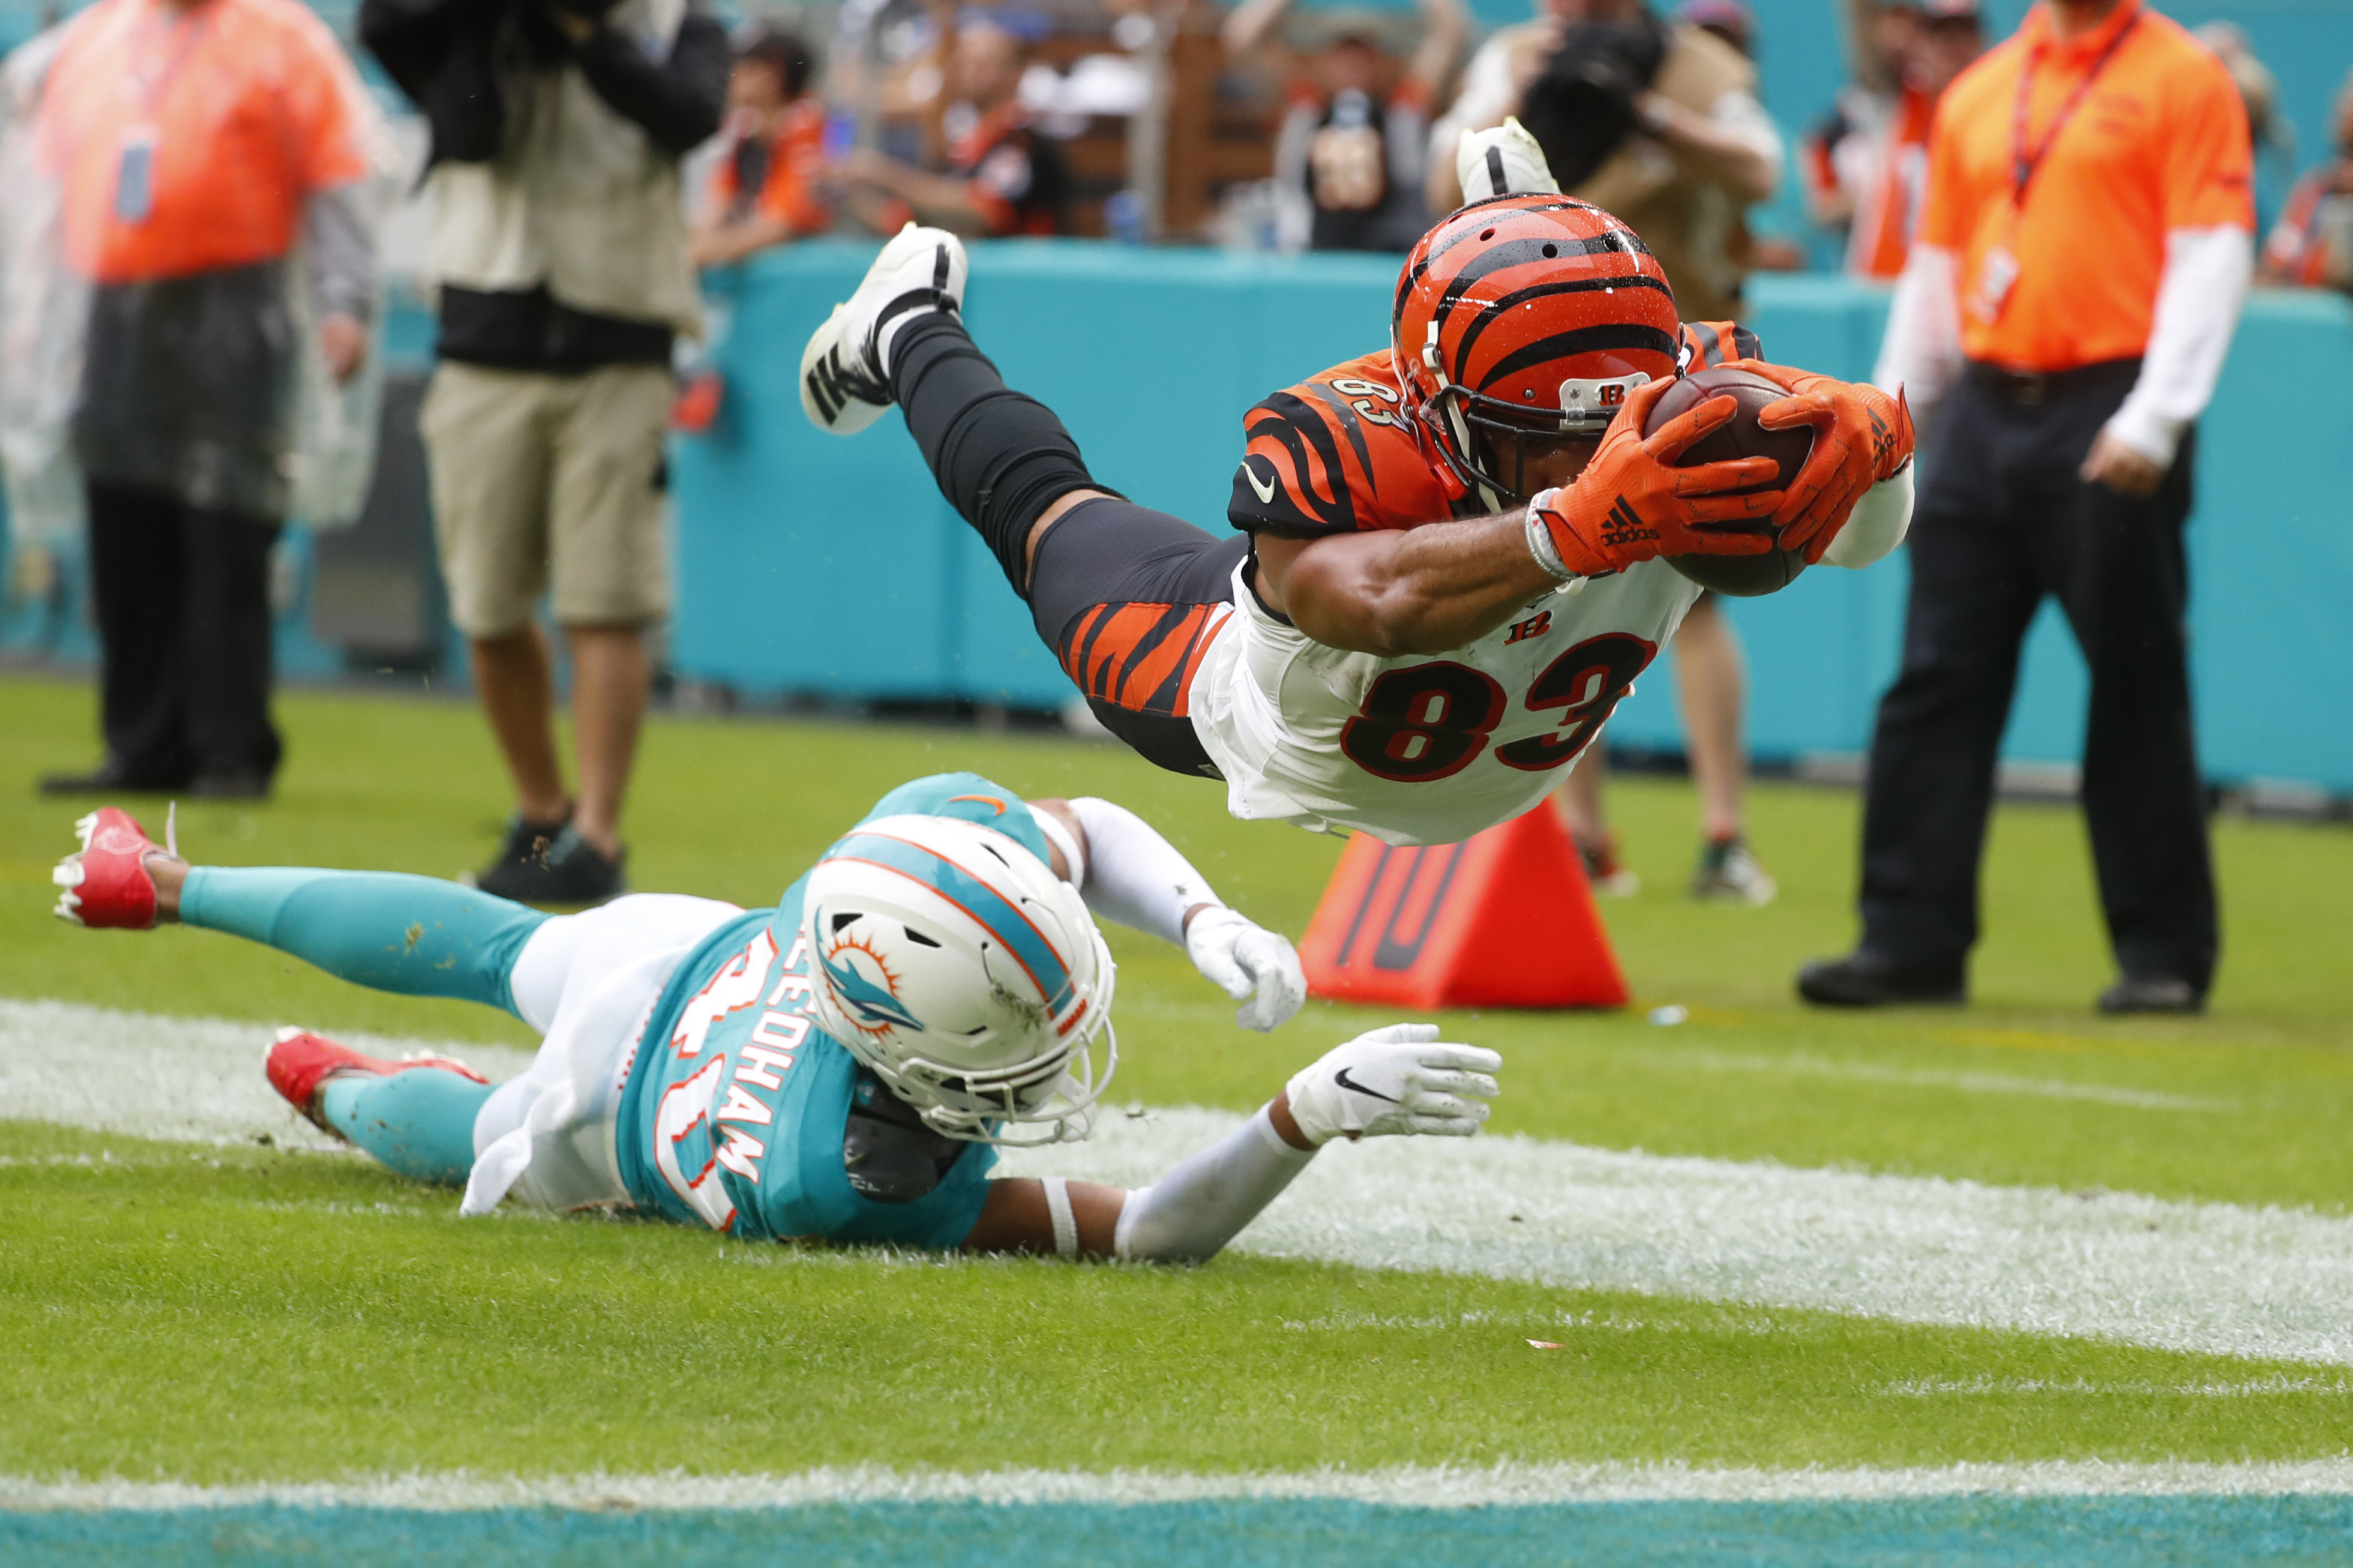 NFL ICYMI: Bengals take care of business, clinch top pick